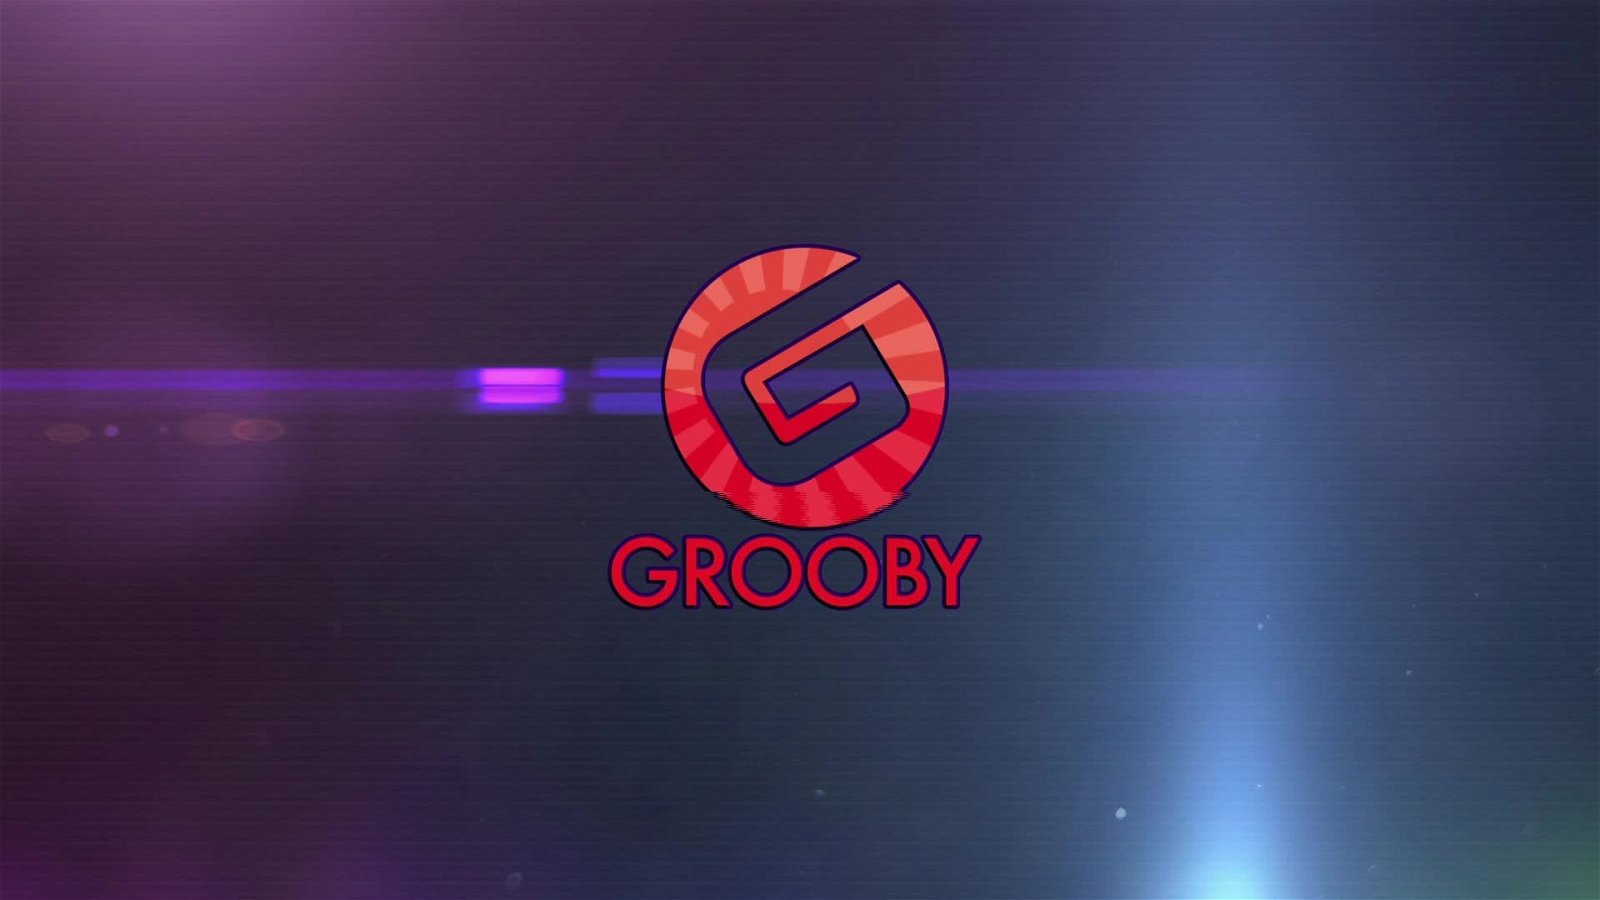 Video post by Grooby